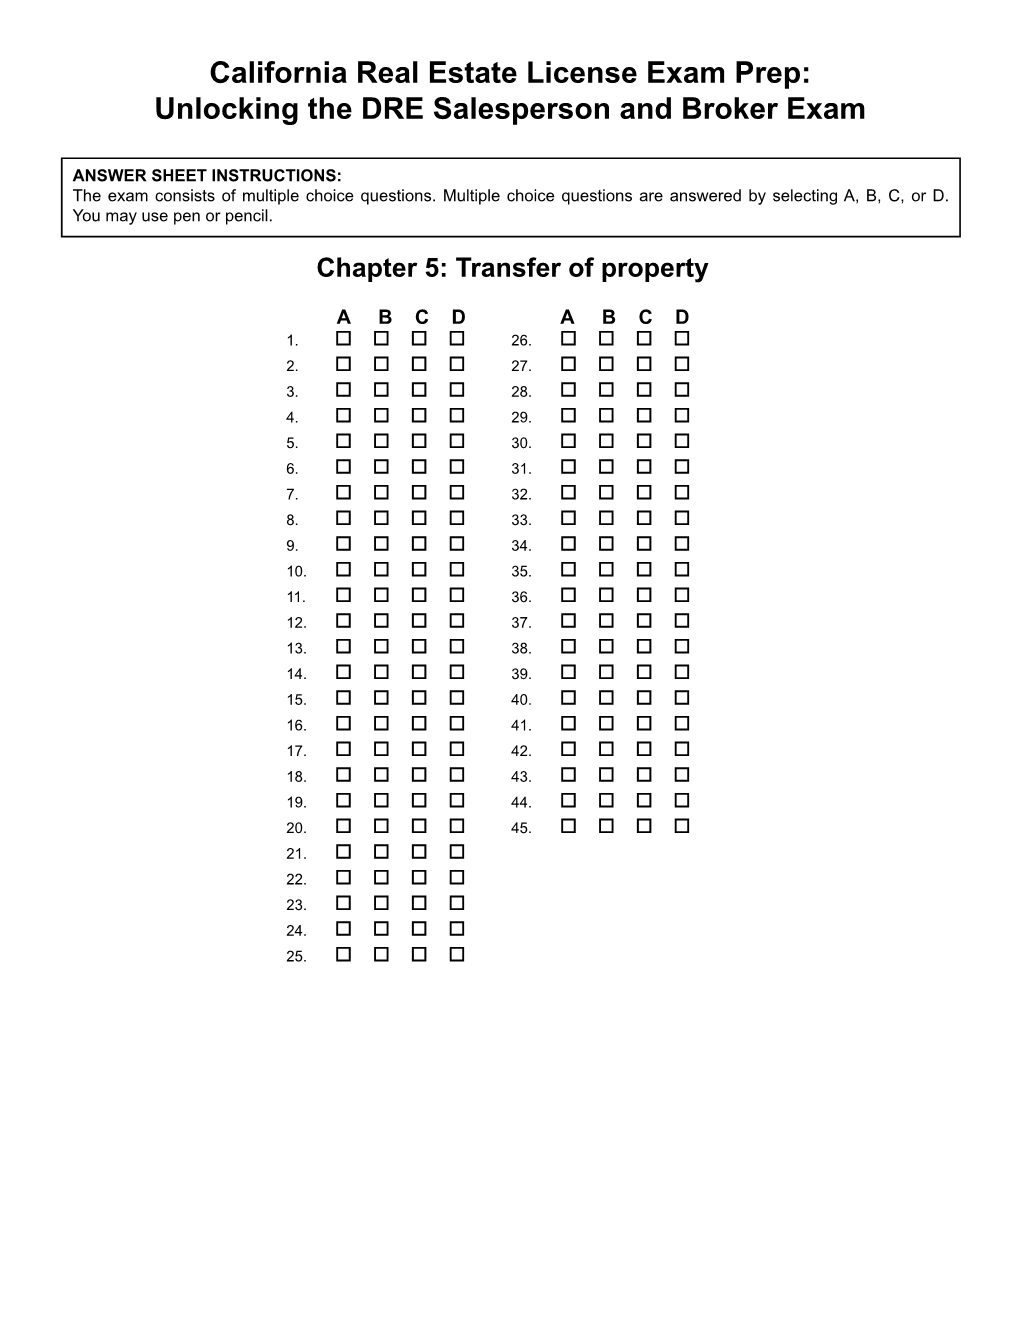 Chapter 5: Transfer of Property